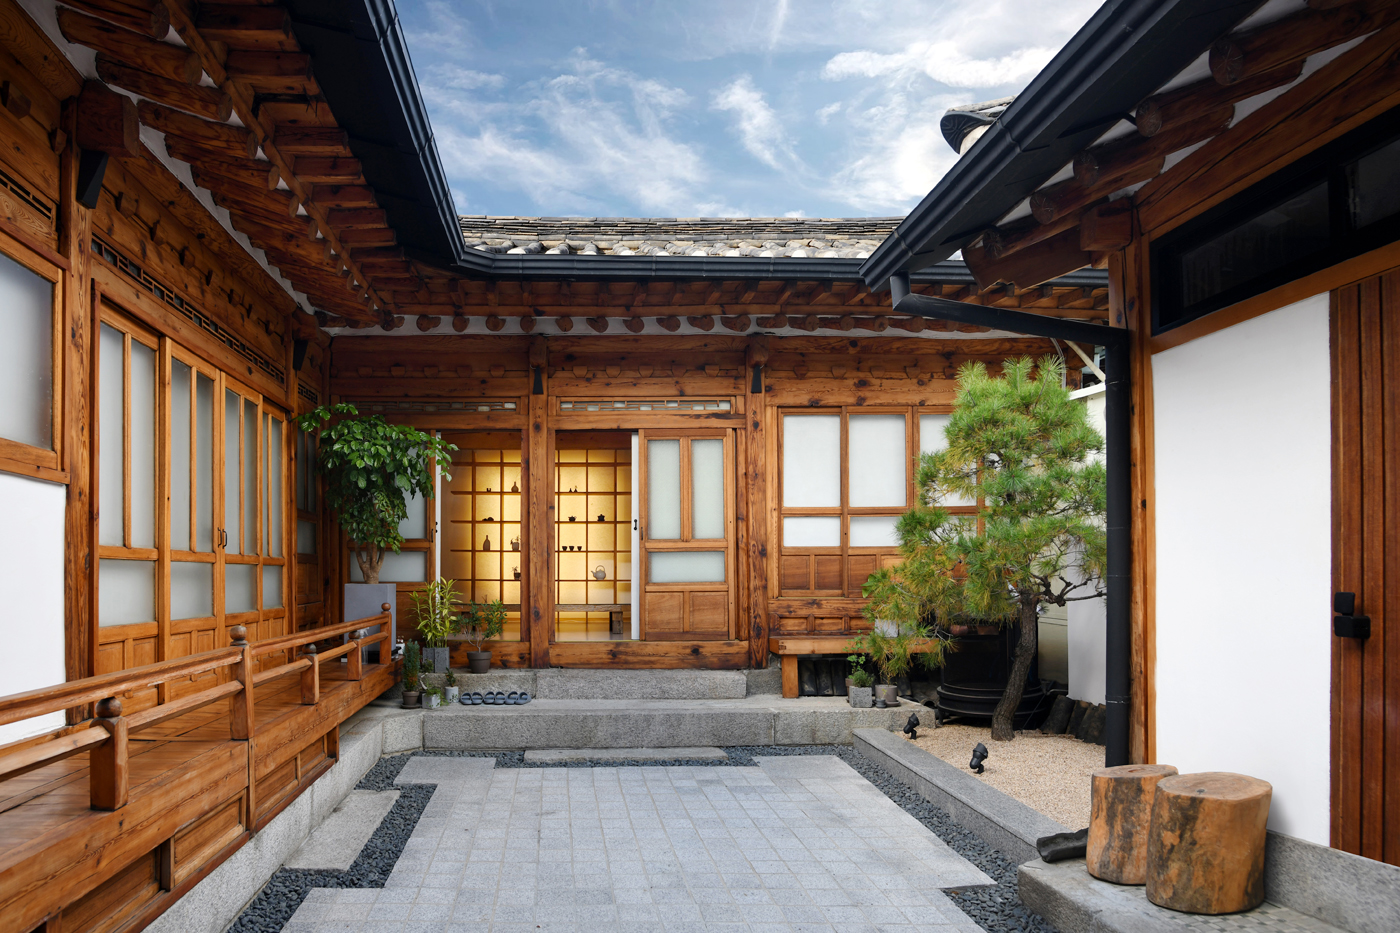 Korean Traditional Hanok (Seoul, Korea)A traditional hanok built in the 1920s with design cues of a bygone era combined with the comforts of a modern home. 